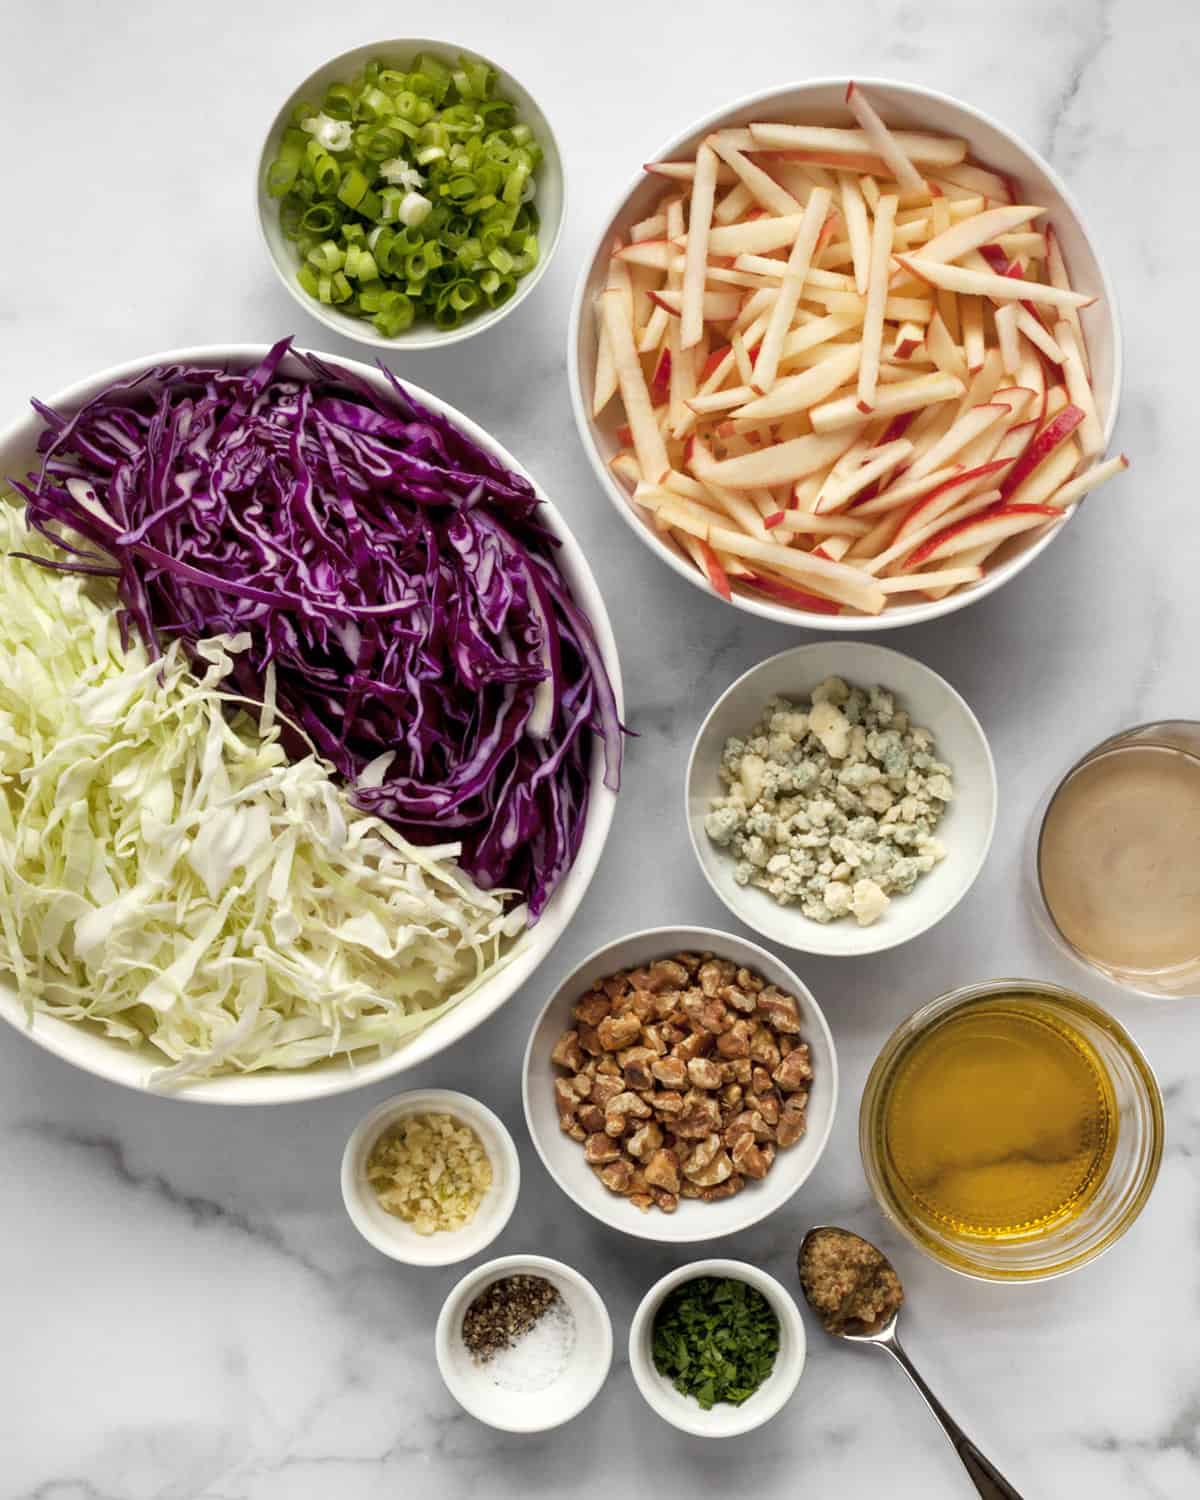 Ingredients including cabbage, apples, walnuts, blue cheese and scallions.